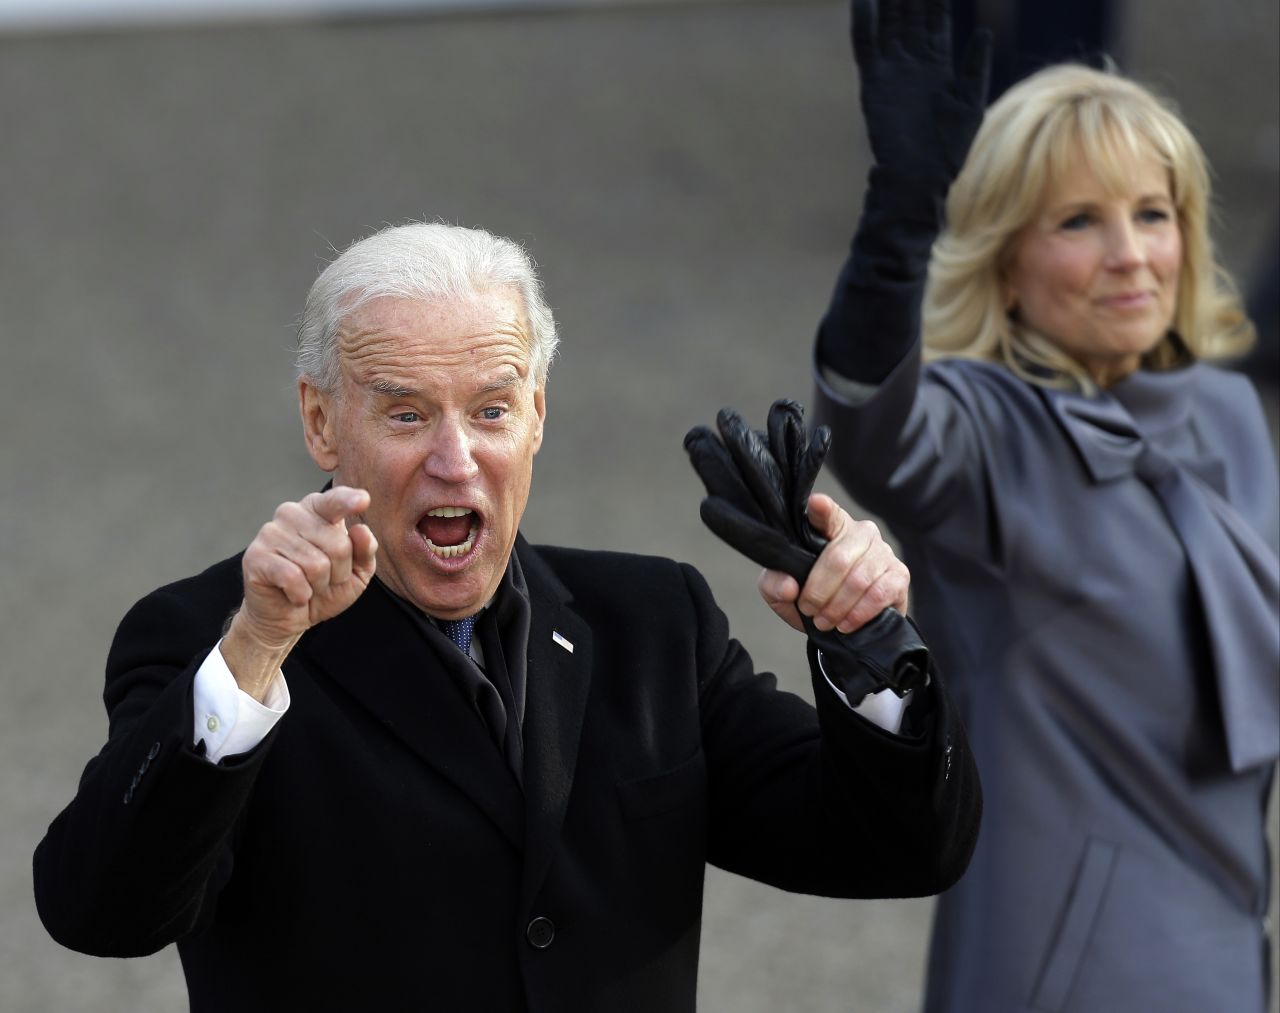 Joe Biden, with wife Jill, reacts to the crowd as they walk down Pennsylvania Avenue during the 2013 inaugural parade.